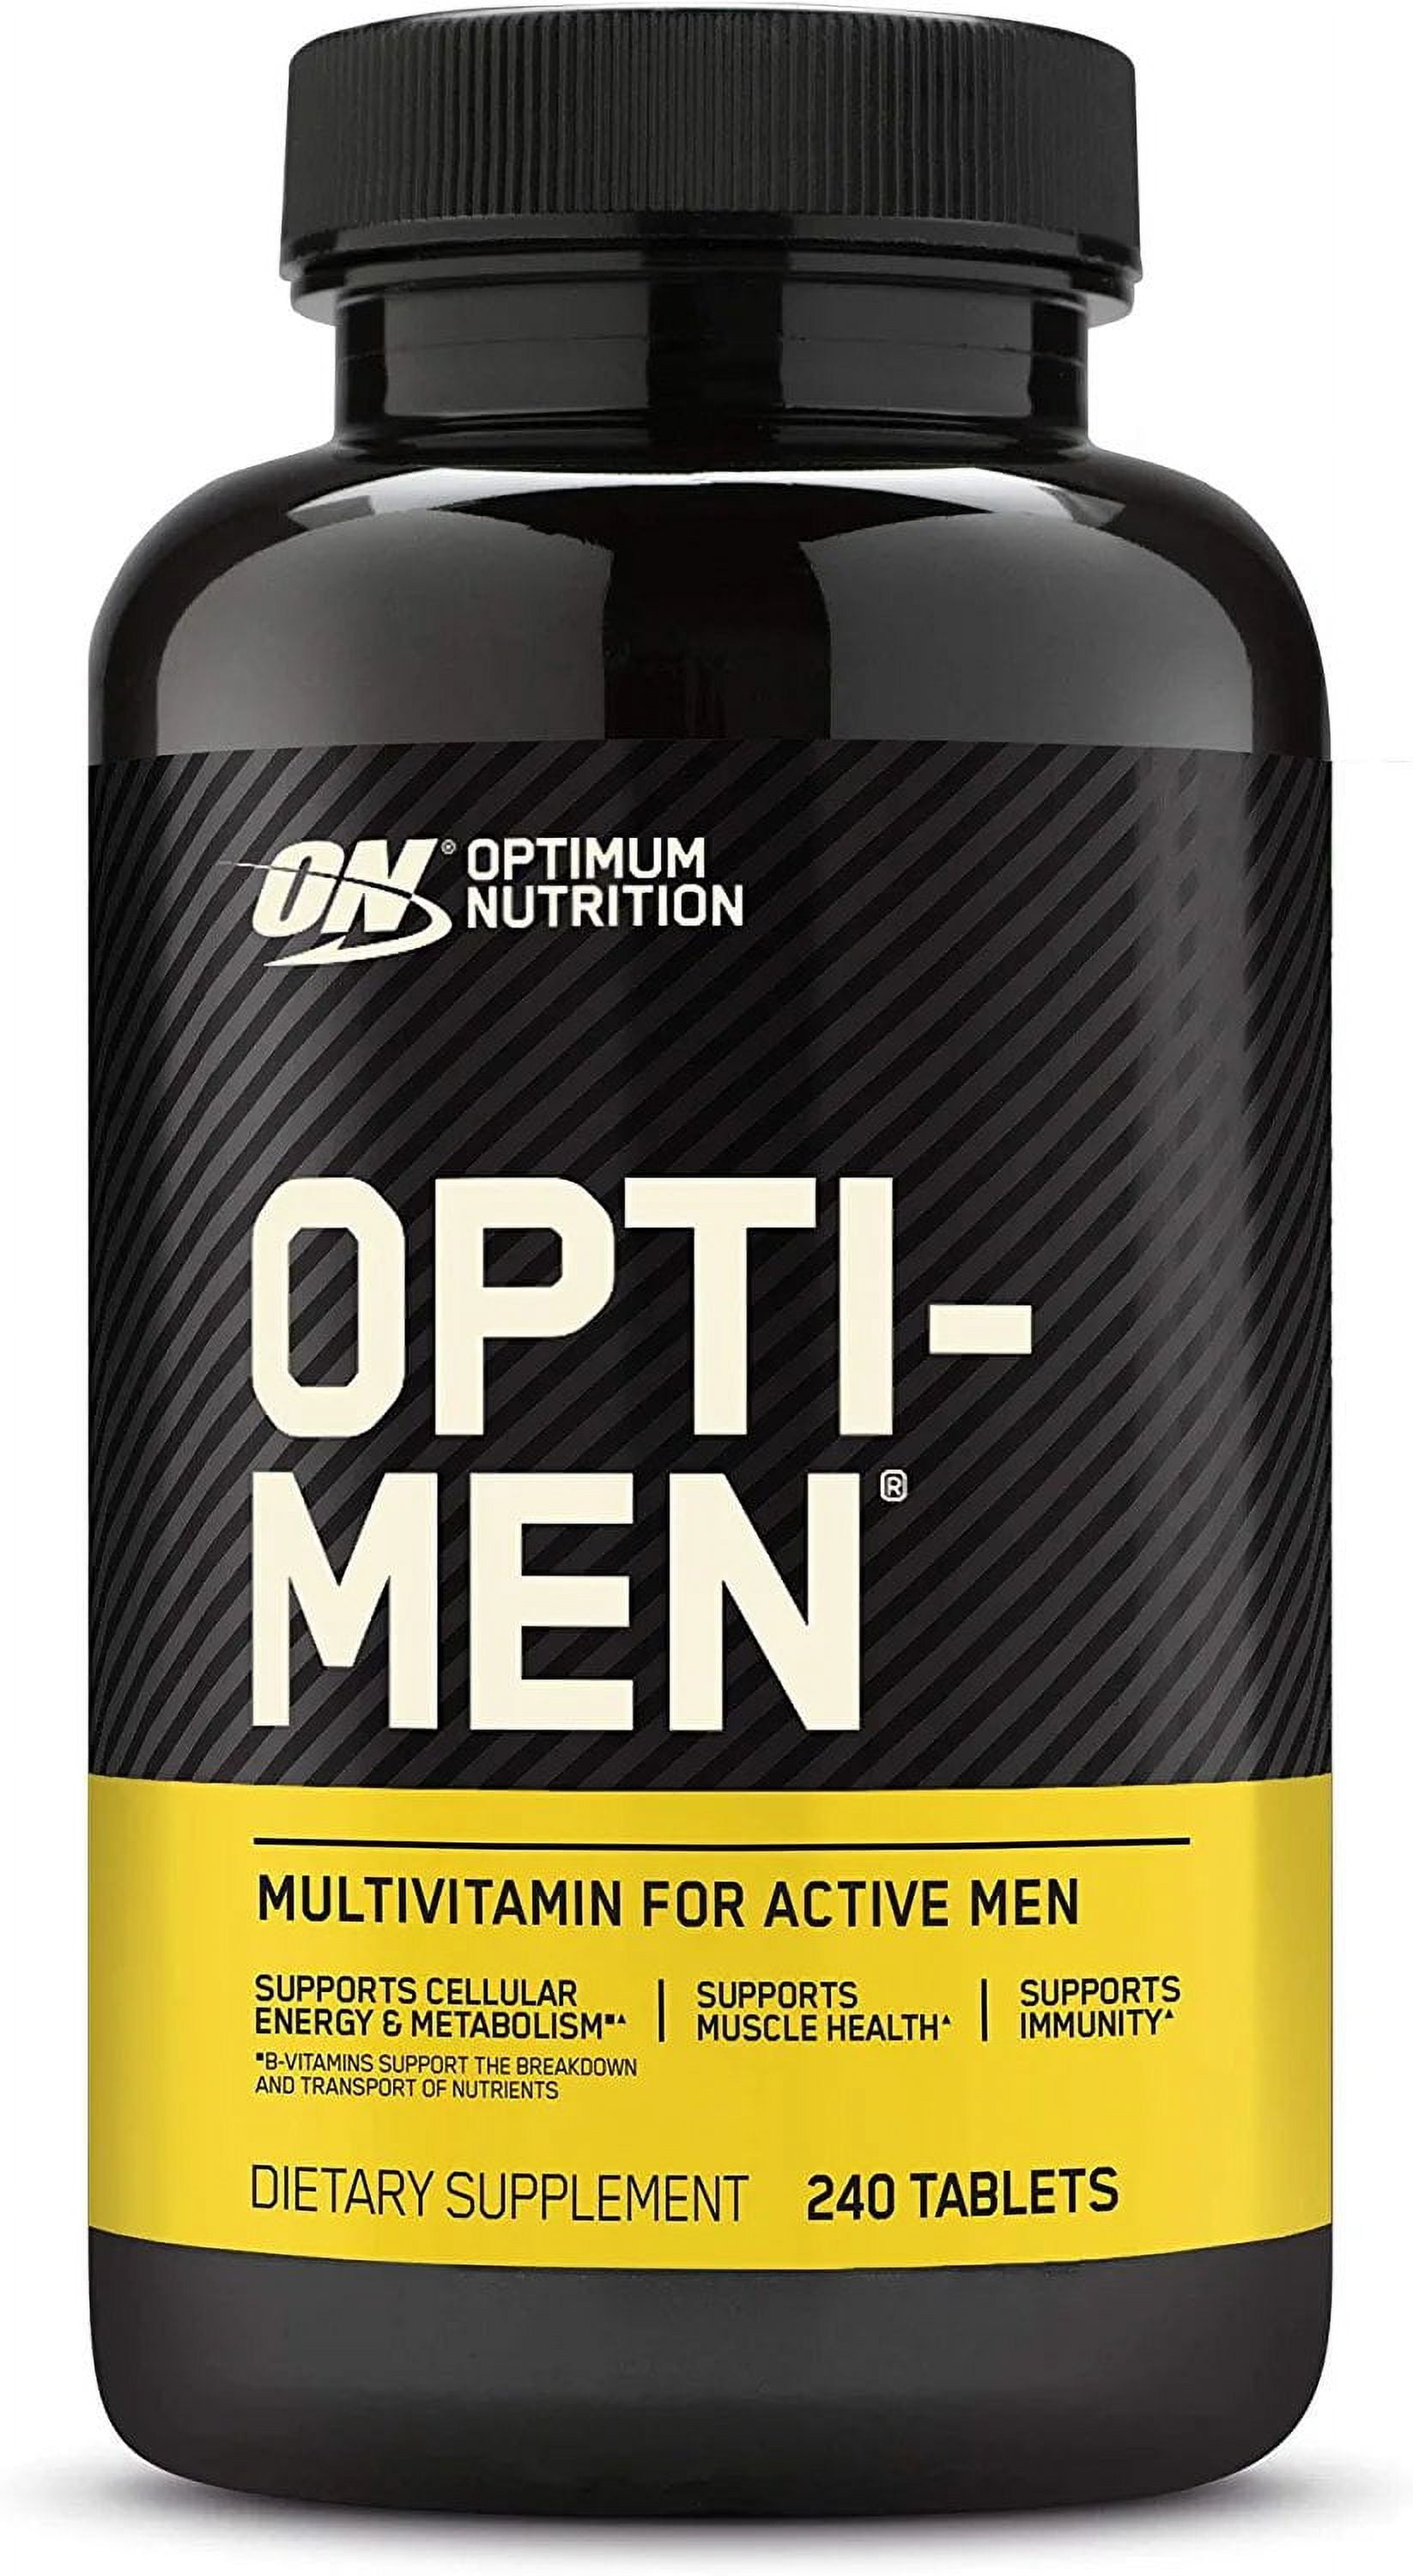  Optimum Nutrition Opti-Men, Vitamin C, Zinc and Vitamin D, E,  B12 for Immune Support Mens Daily Multivitamin Supplement, 150 Count  (Packaging May Vary) : Health & Household